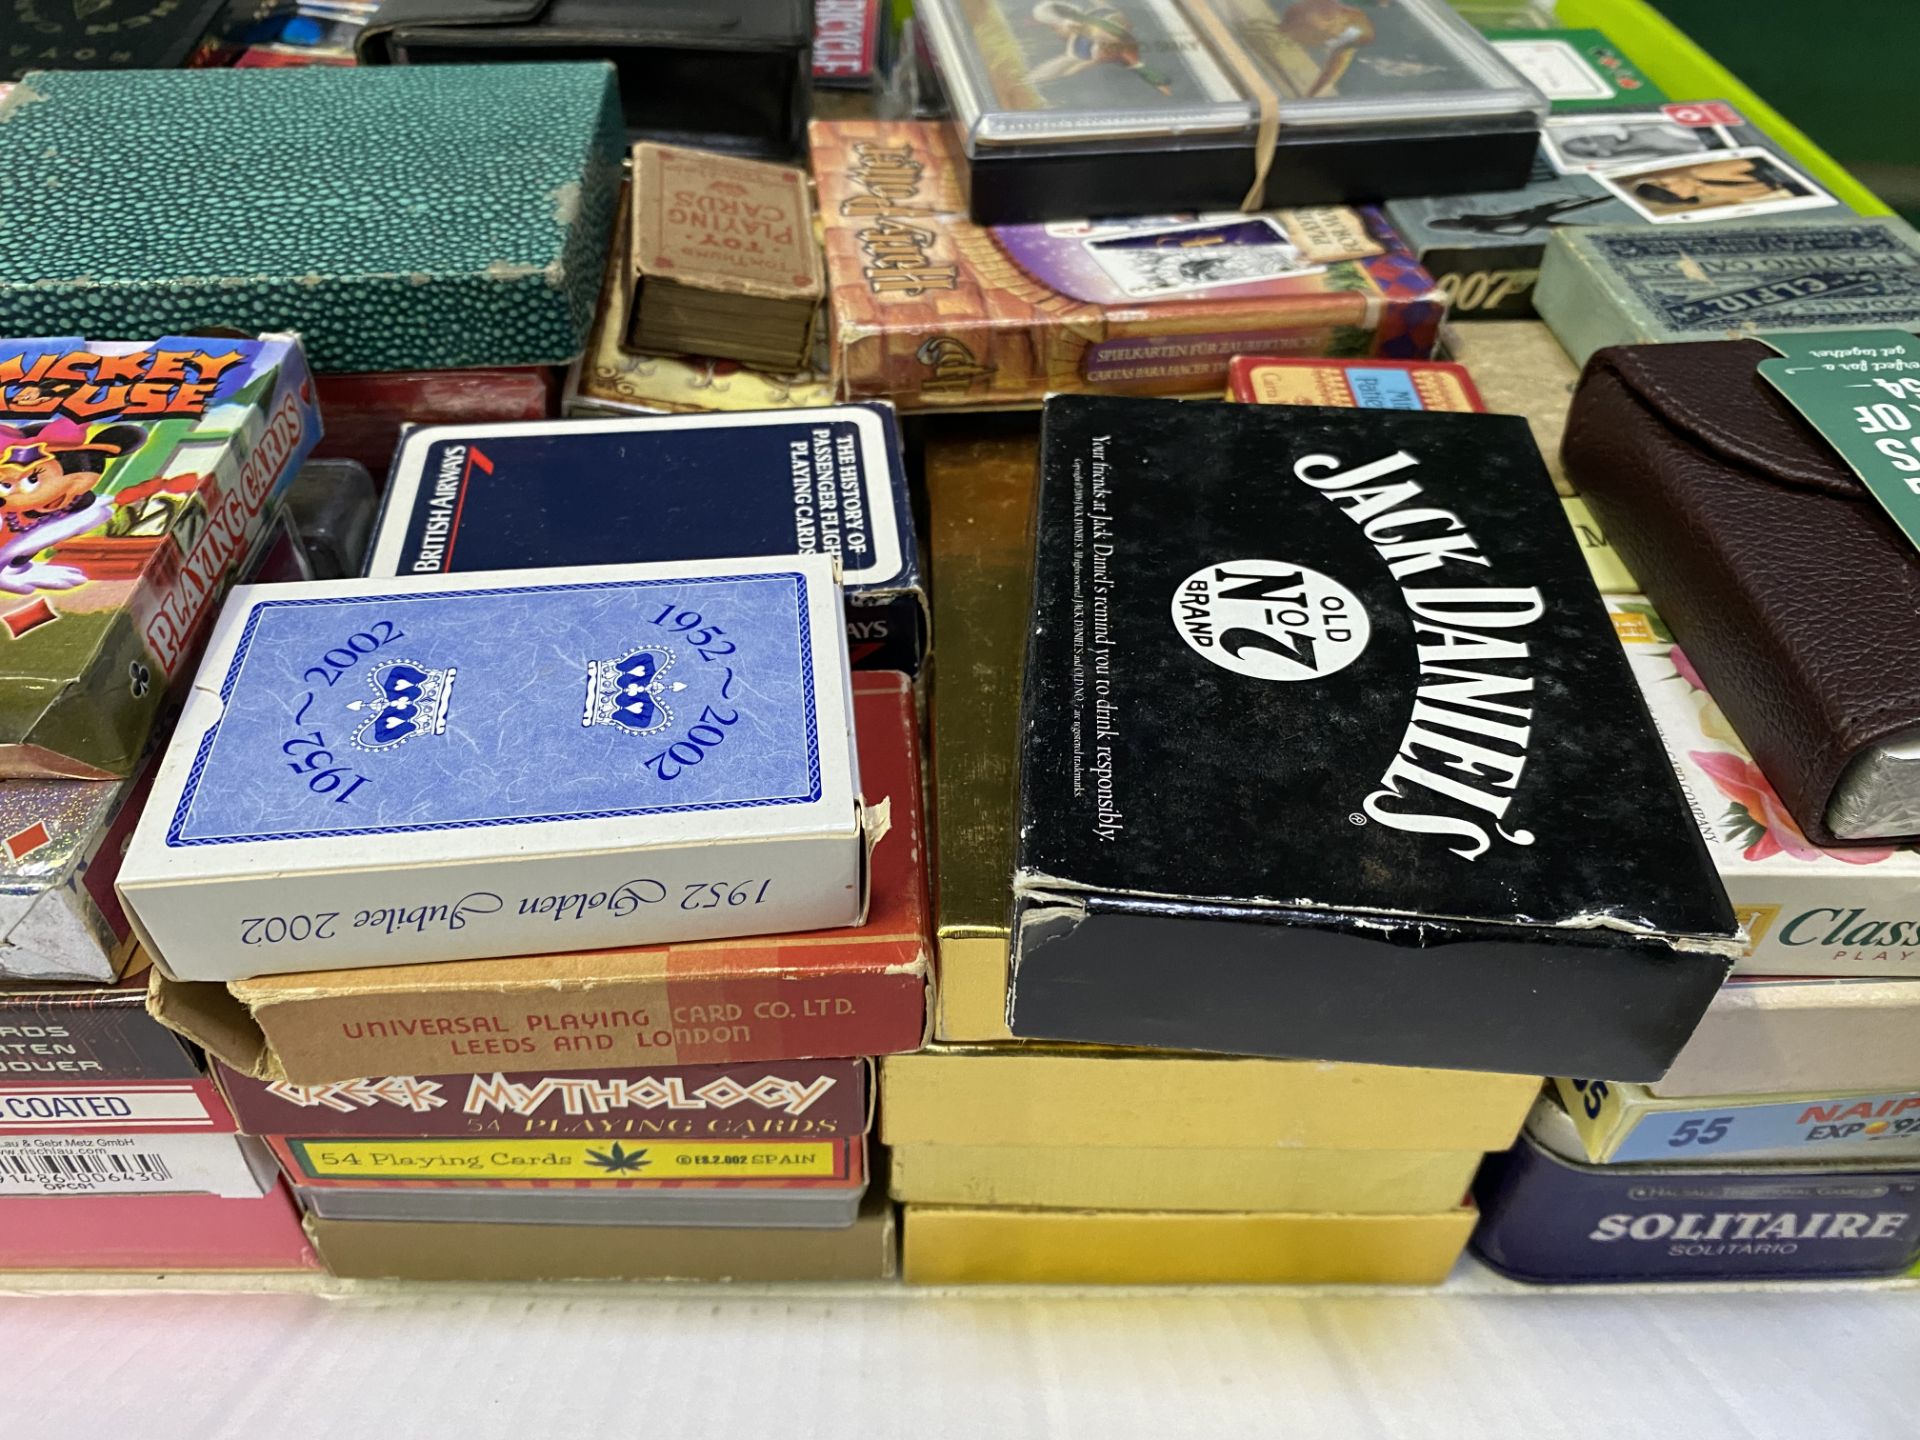 Approximately 200 packs of playing cards; together with portfolio folders of "Joker" playing cards. - Image 2 of 5